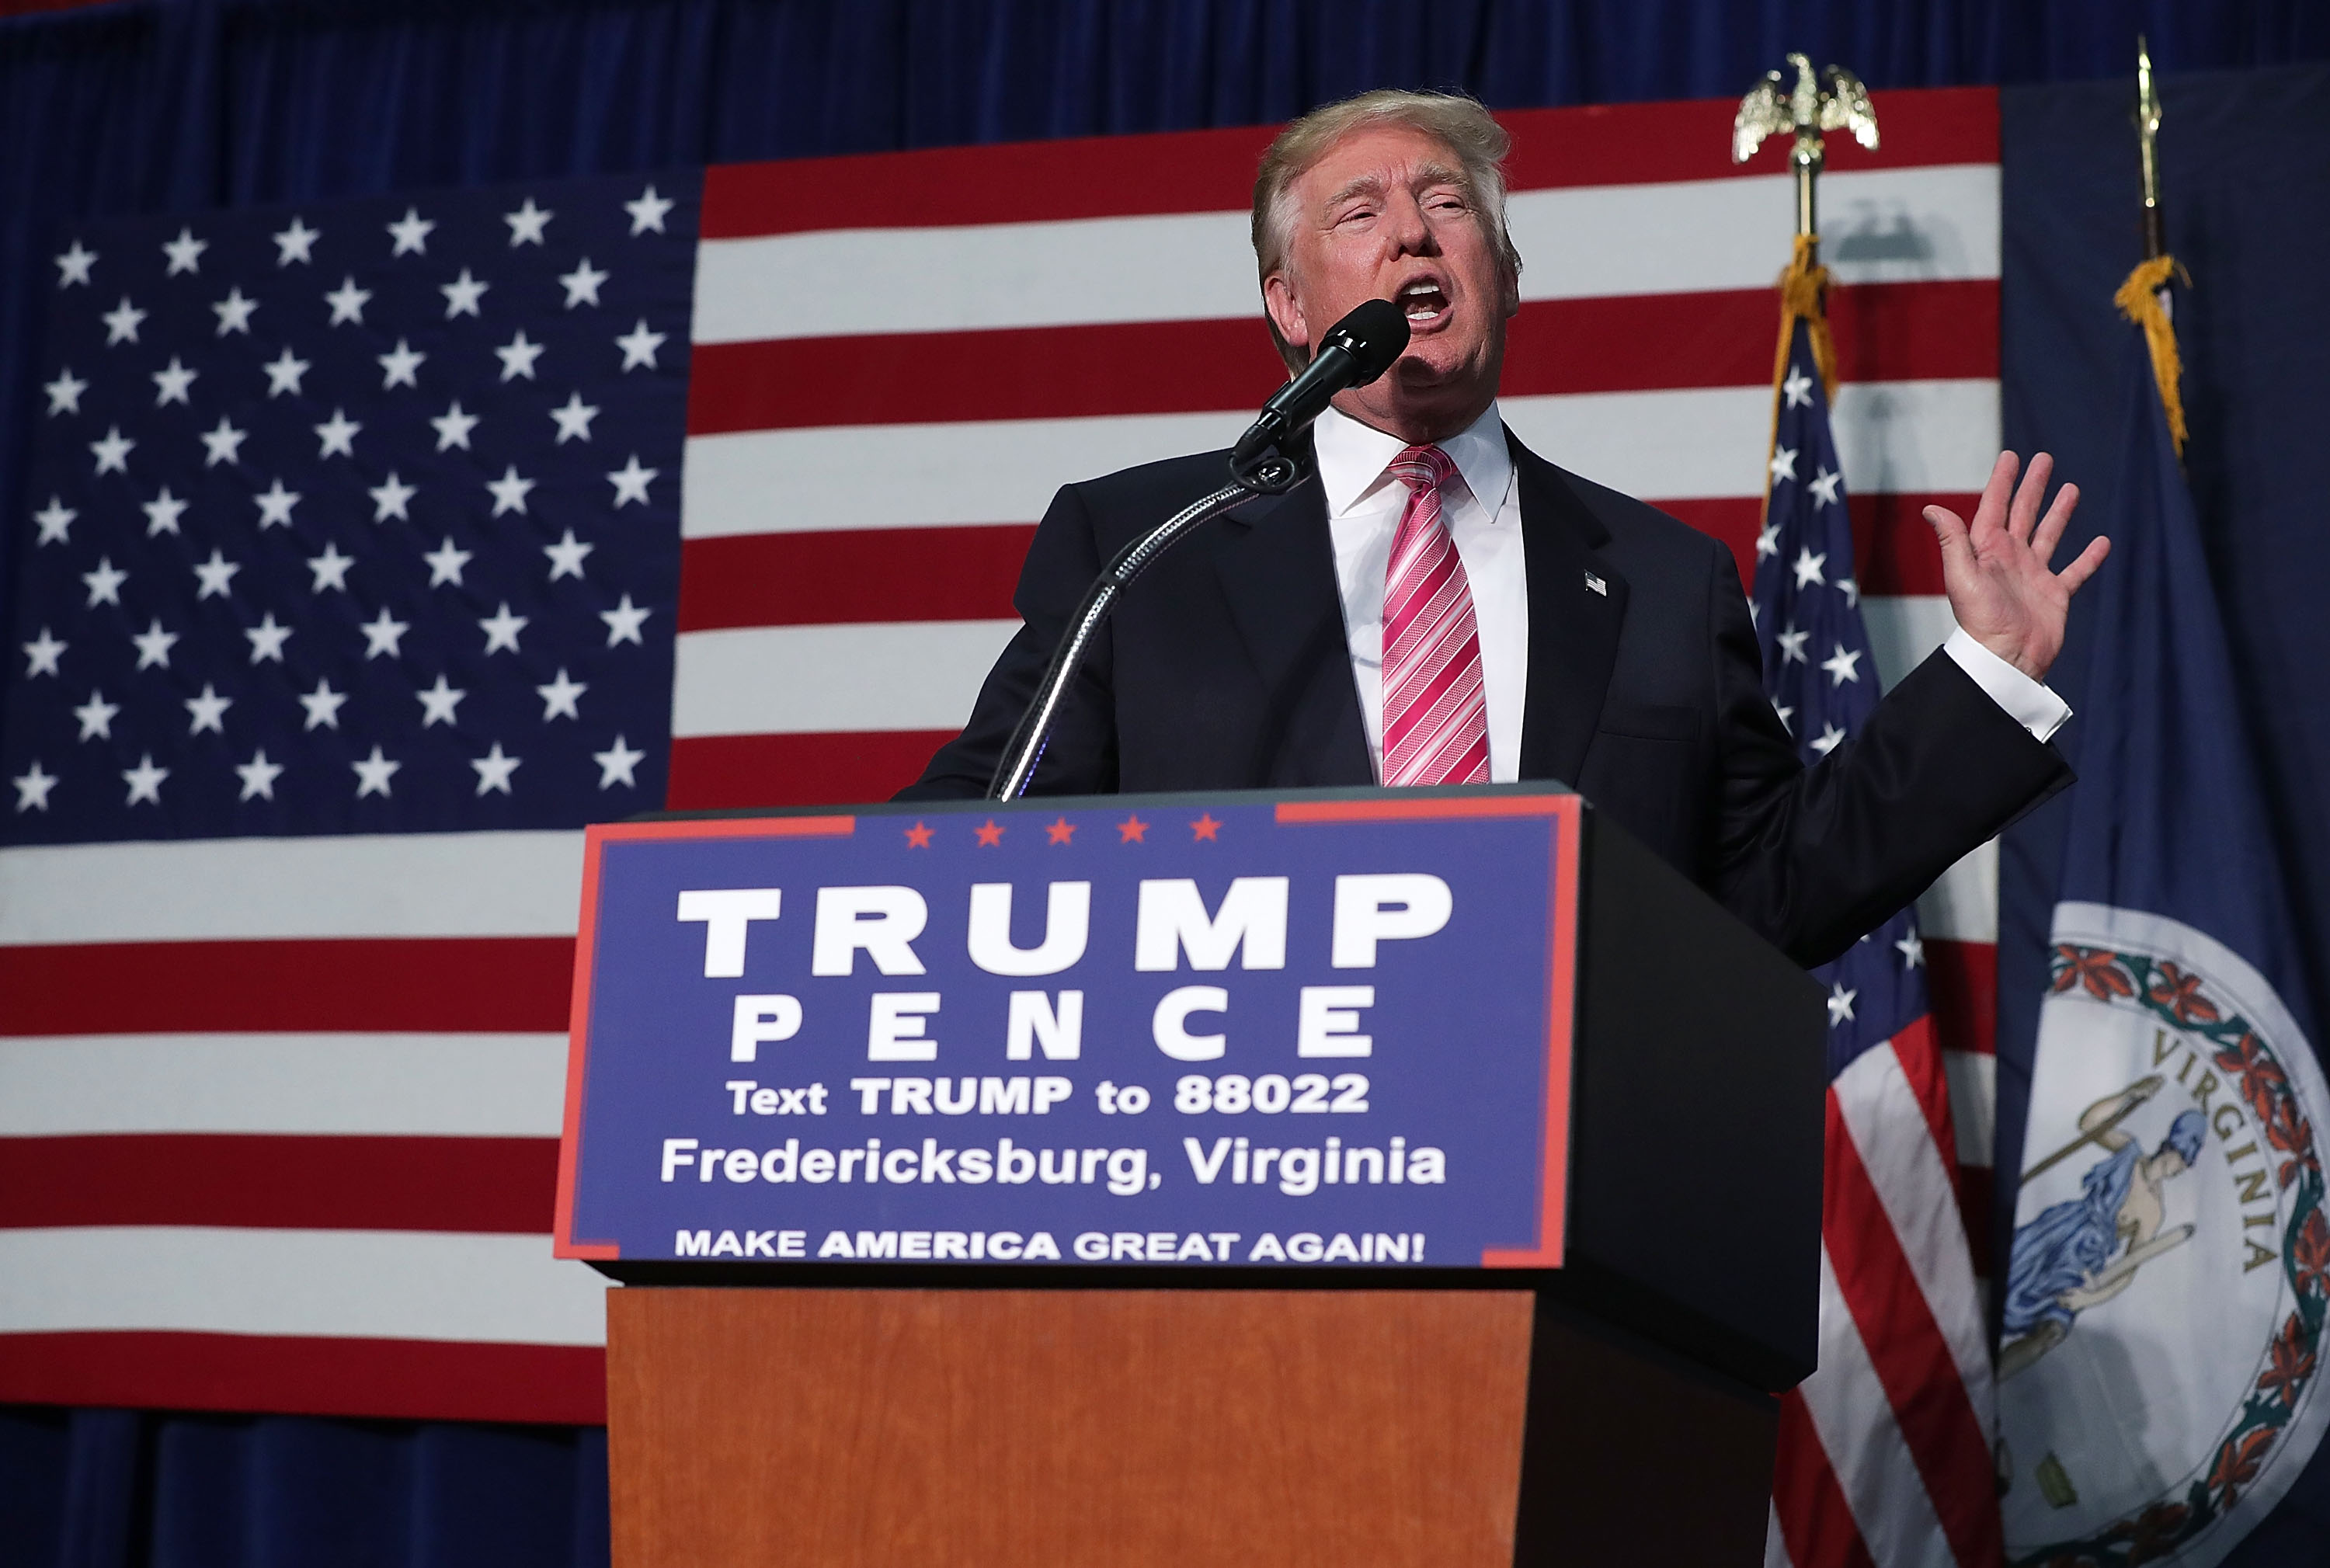 Donald Trump speaks to voters during a campaign rally, on Aug. 20, 2016 in Fredericksburg, Va. (Alex Wong—Getty Images)